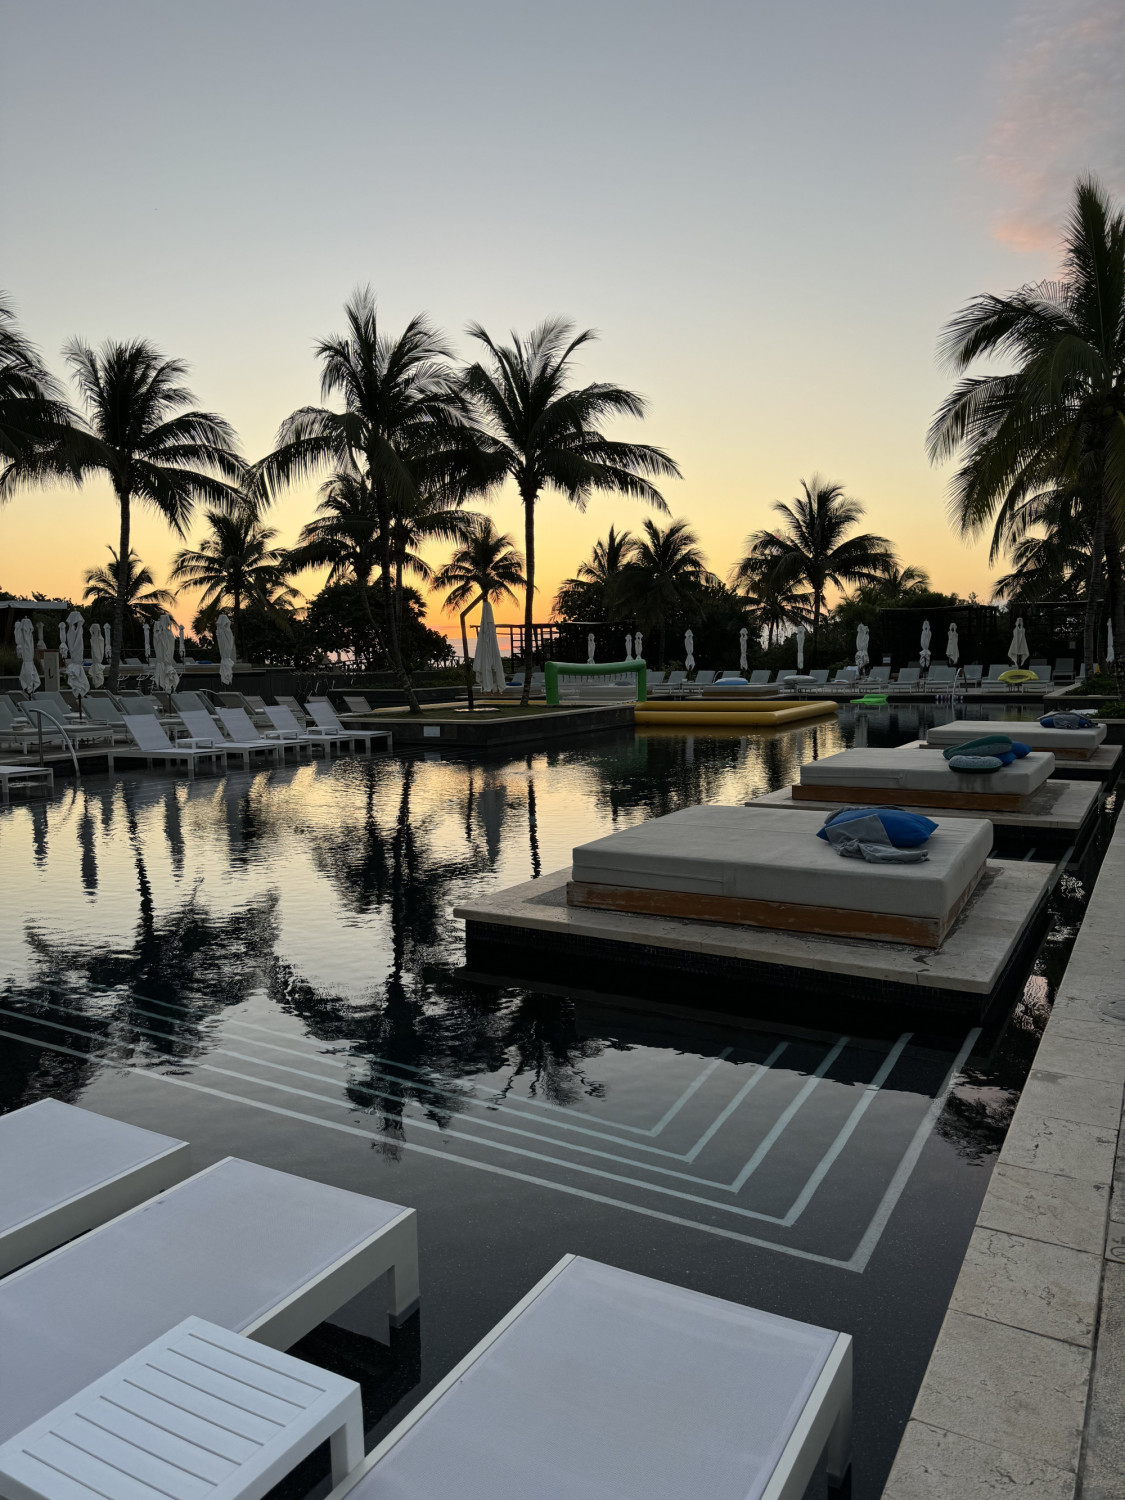 A swimming pool surrounded by lawn chairs, palm trees and day beds. There is a lush palm tree in the background and a golden sunset in the background. 